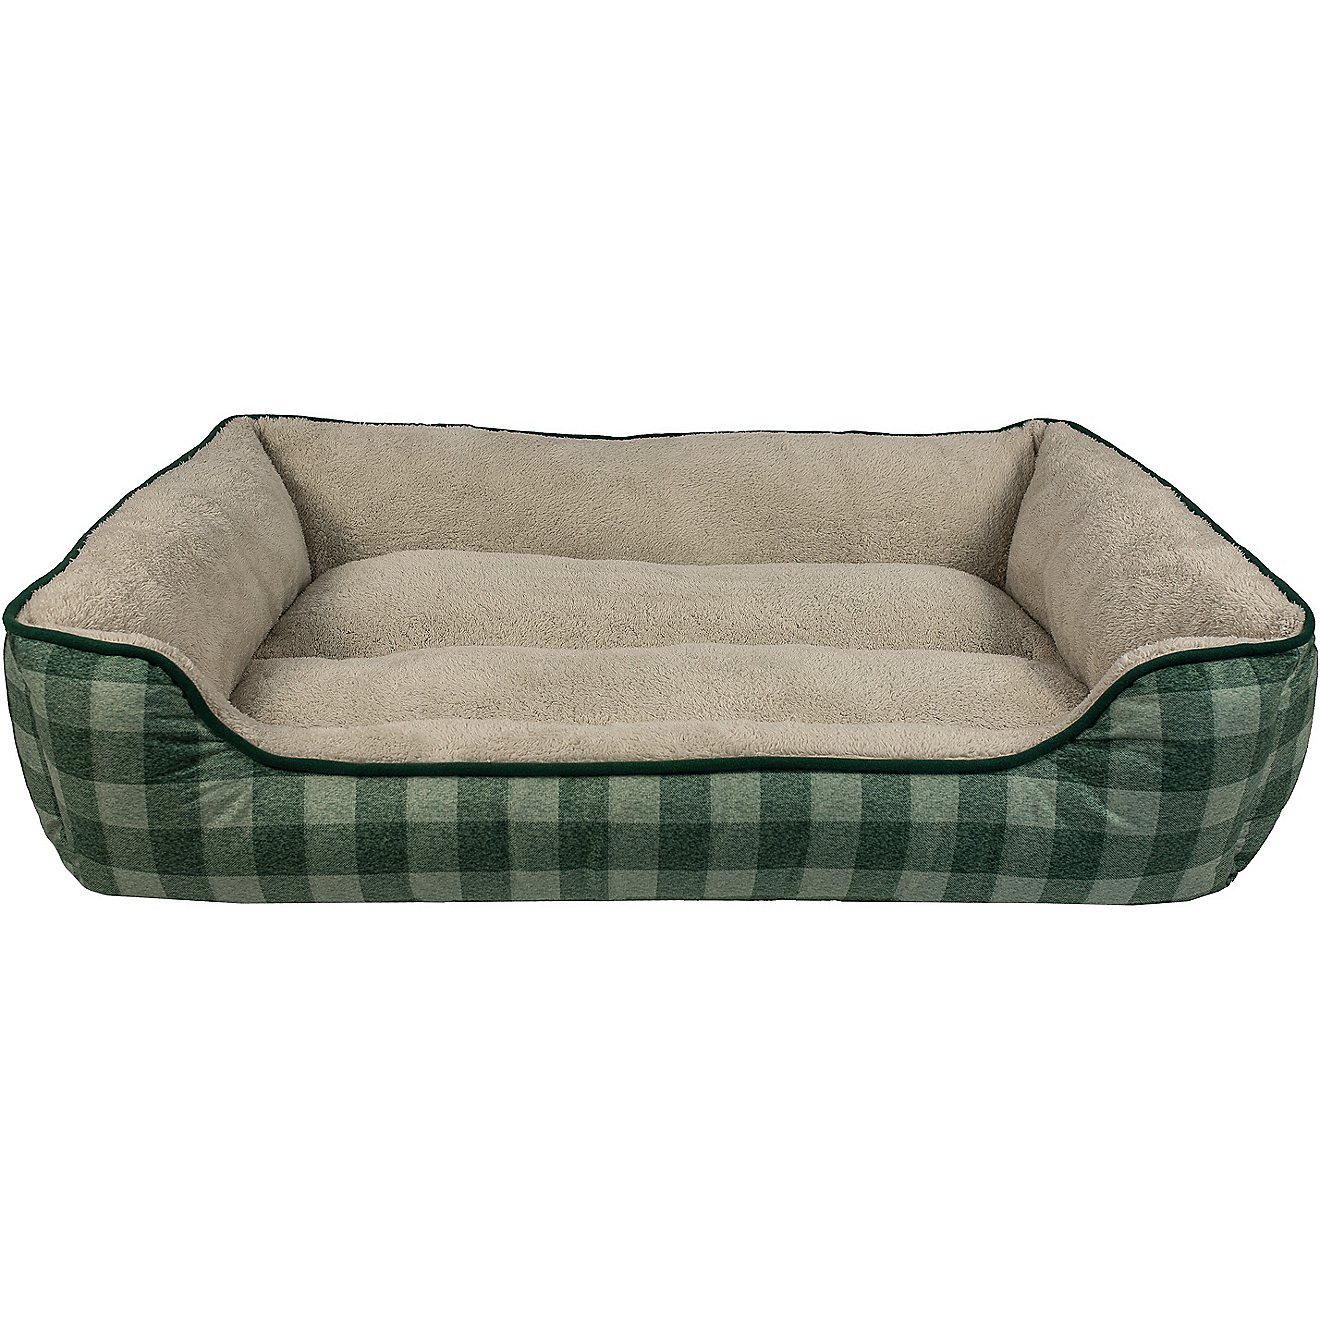 Dallas Manufacturing Company 32" x 42" Plaid Boxed Dog Bed                                                                       - view number 1